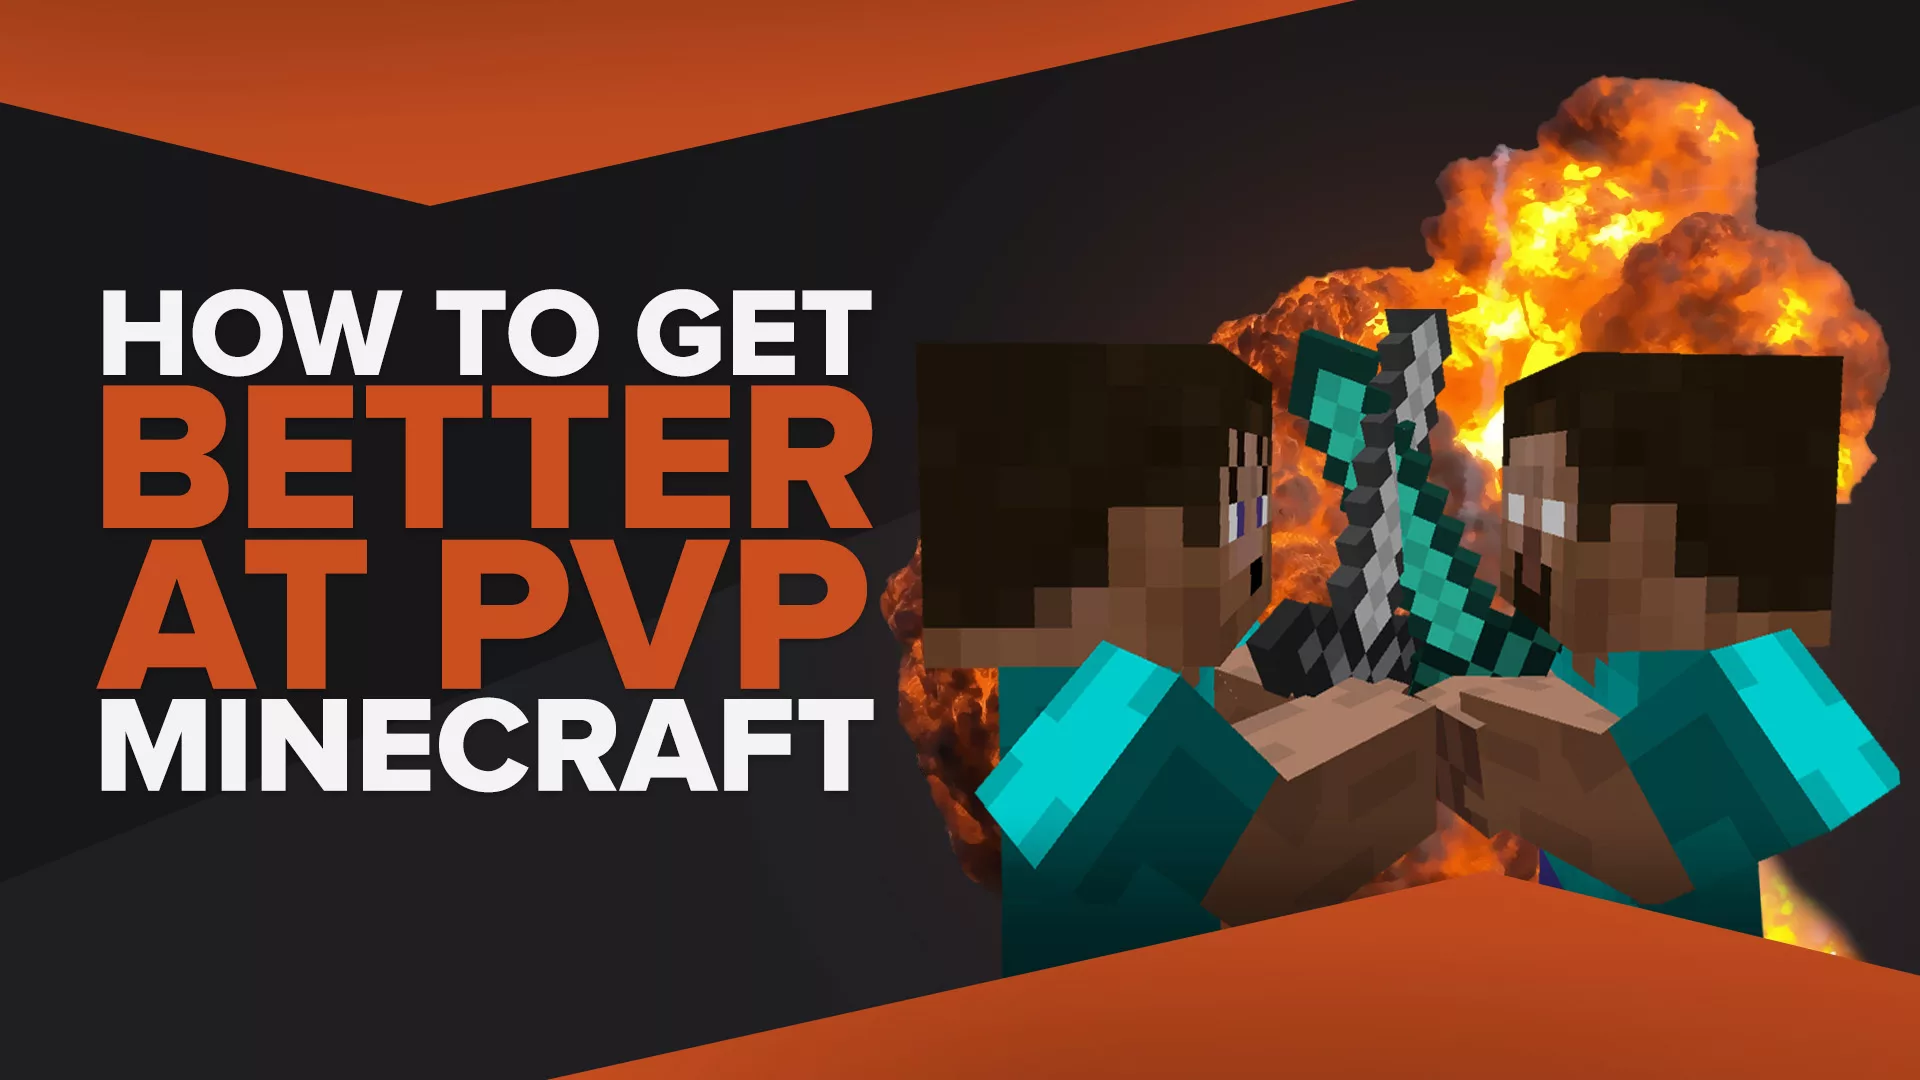 How To Get Better At PVP In Minecraft